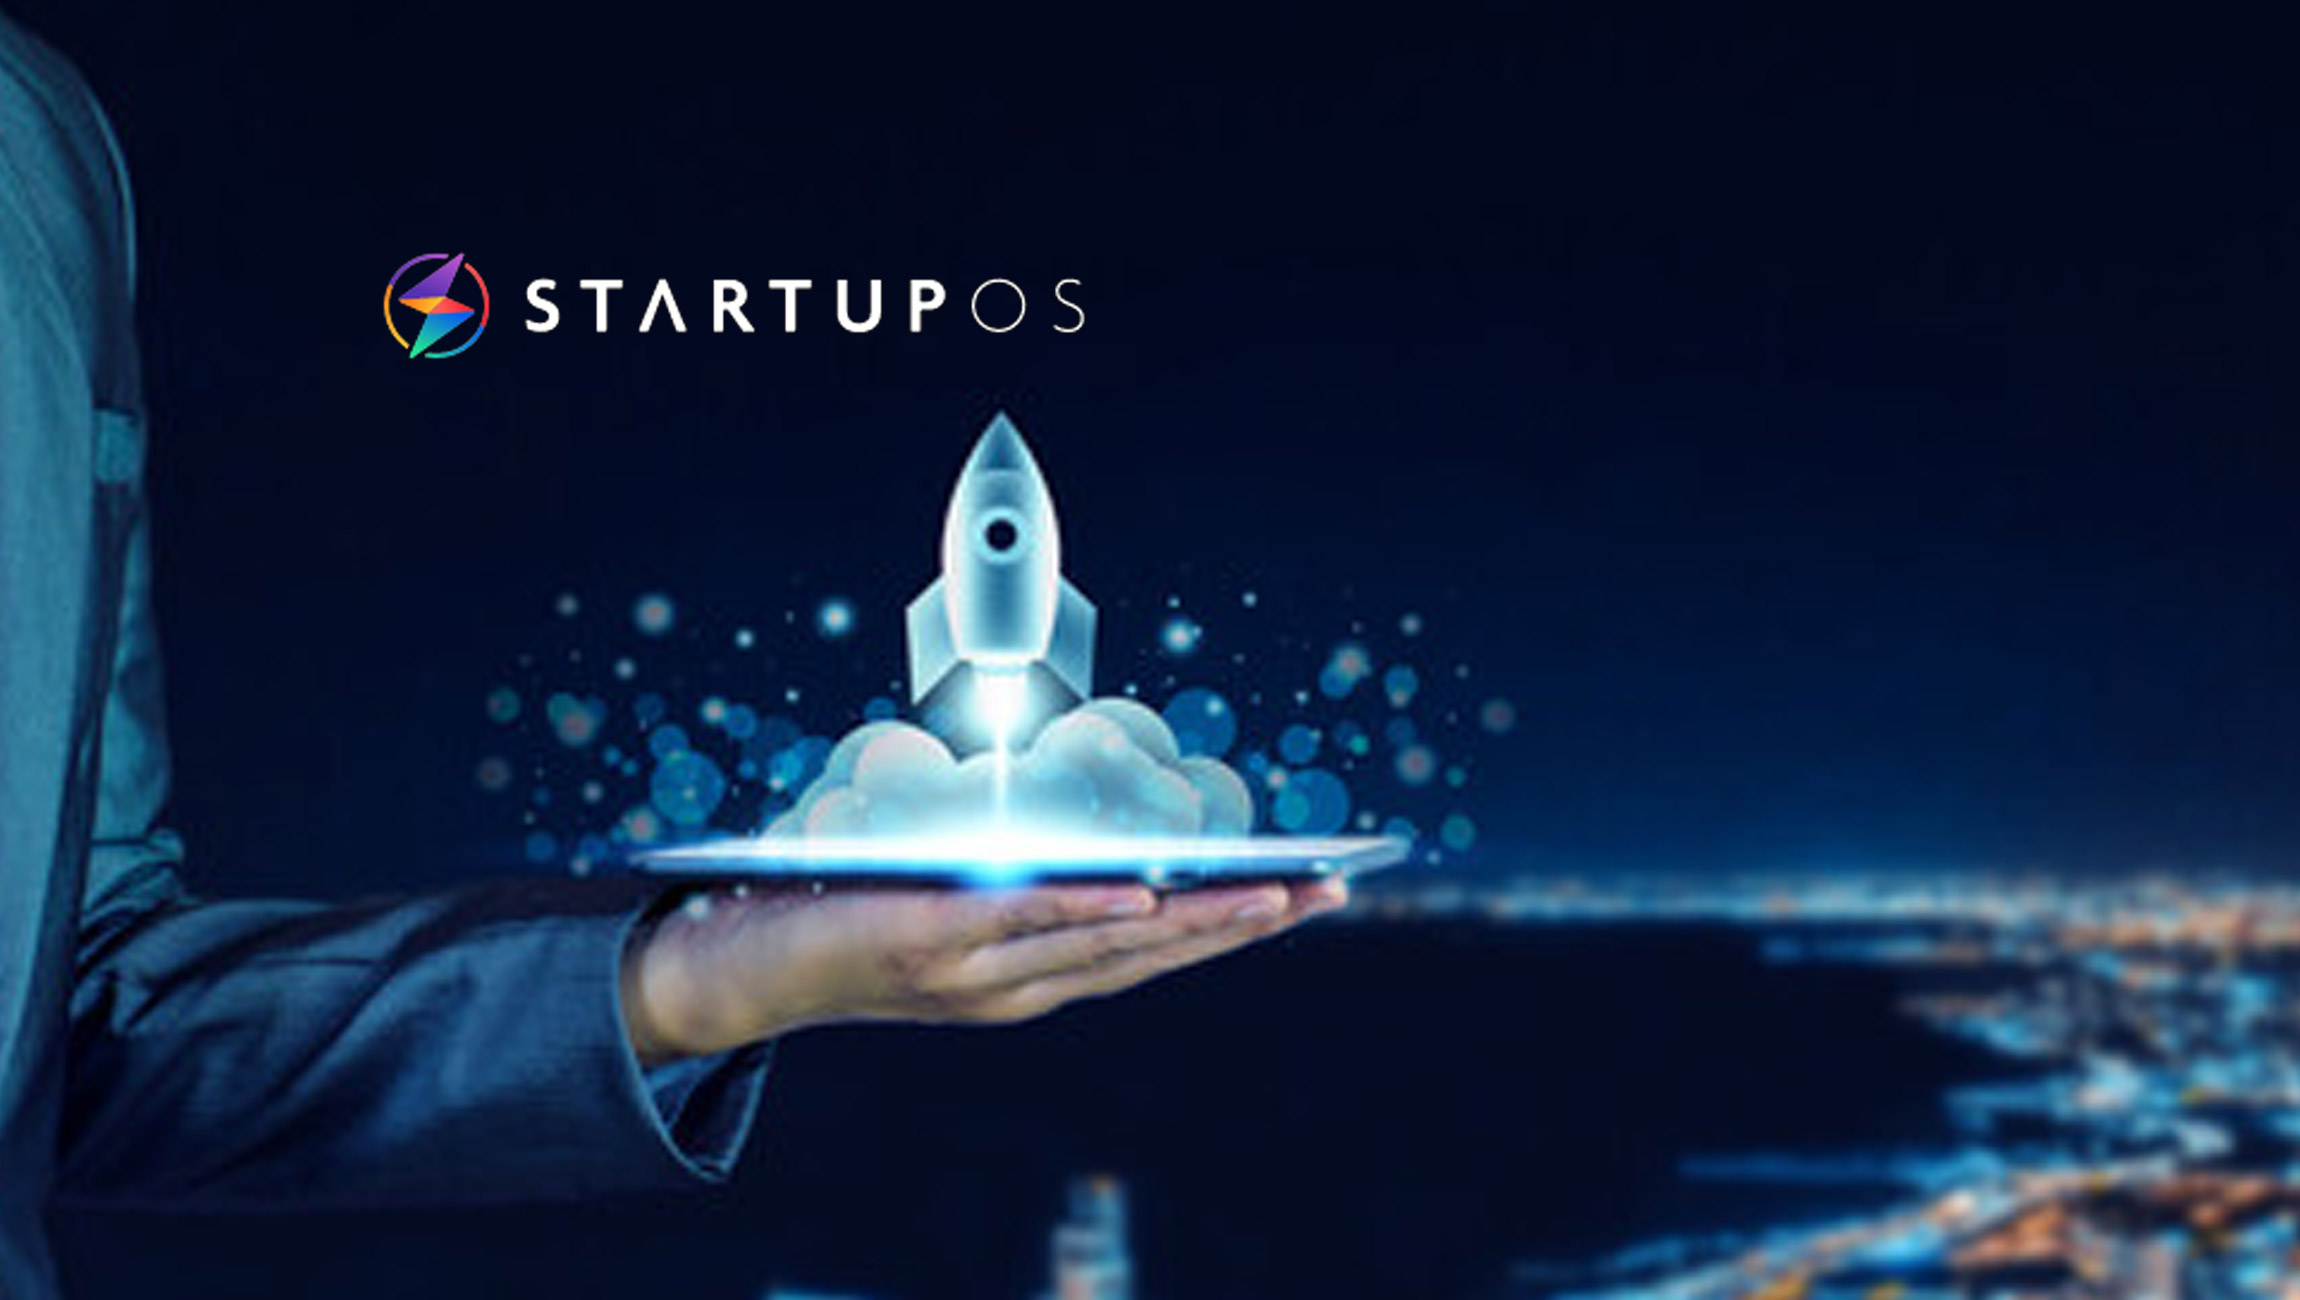 Startups Launches Platform for Early-Stage Startups